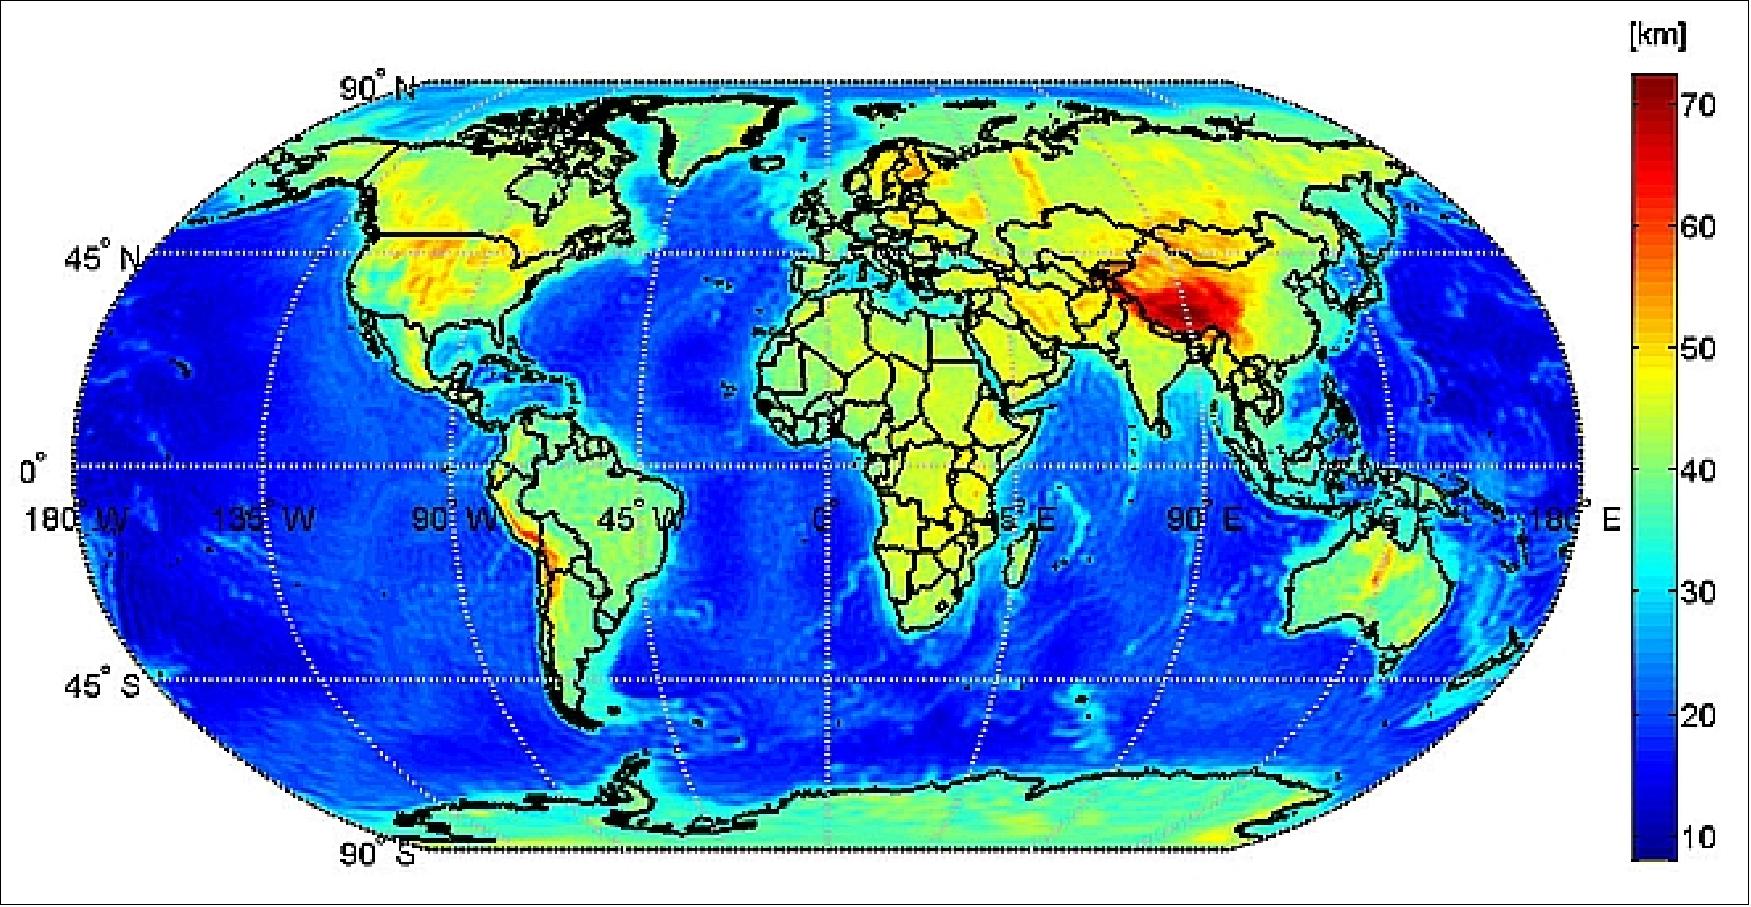 Figure 48: Distribution of the global Mohorovičić discontinuity – known as Moho – based on data from the GOCE satellite (image credit: ESA, GEMMA project)